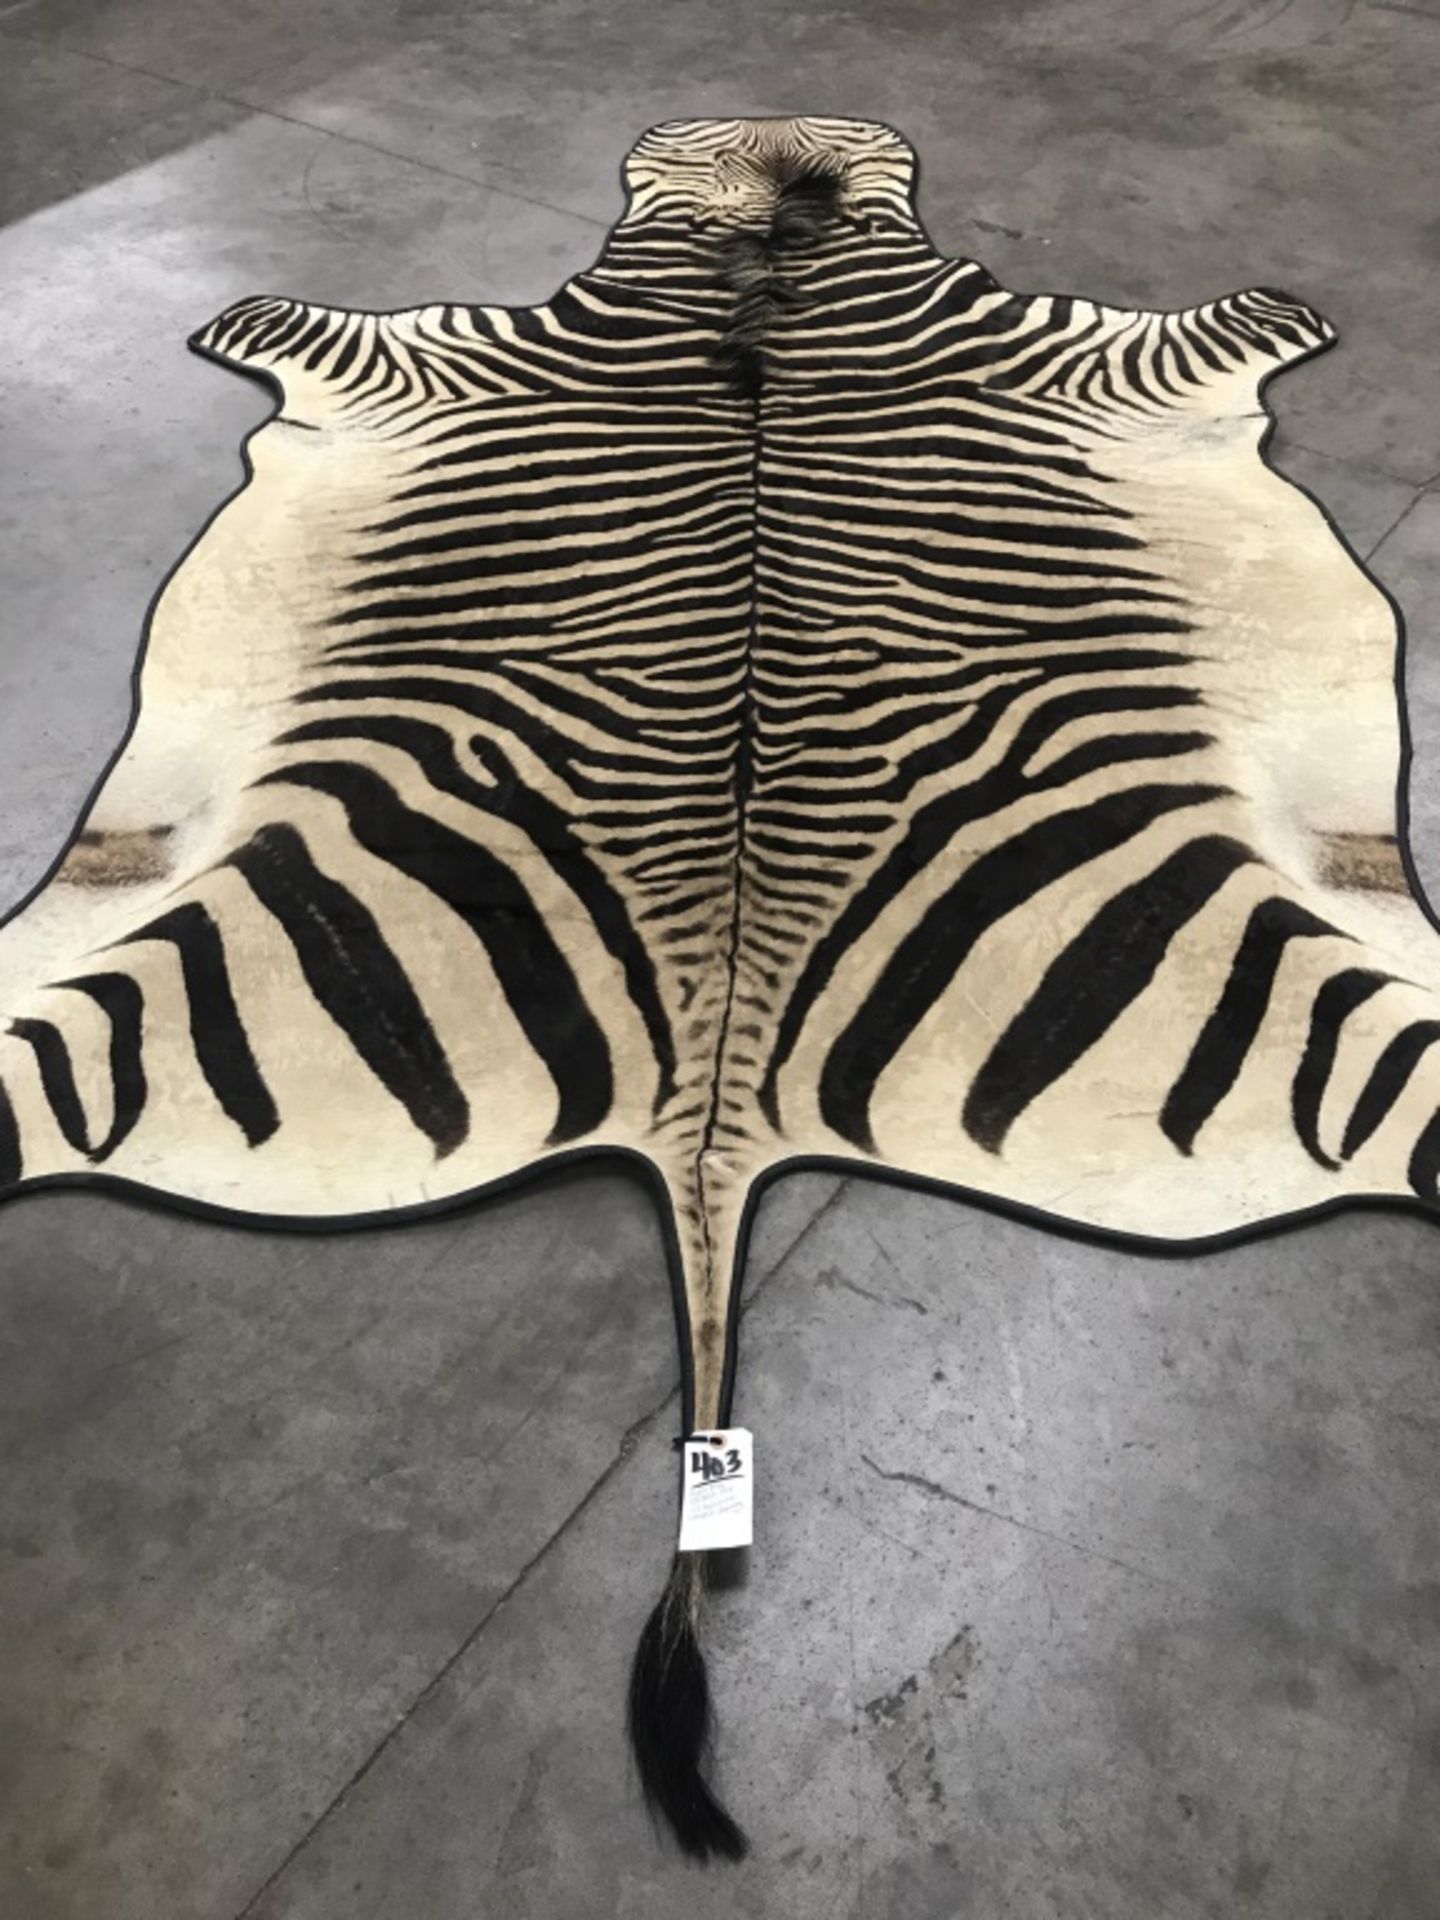 Very Nice Zebra Rug (TX Res. Only) - Image 10 of 13